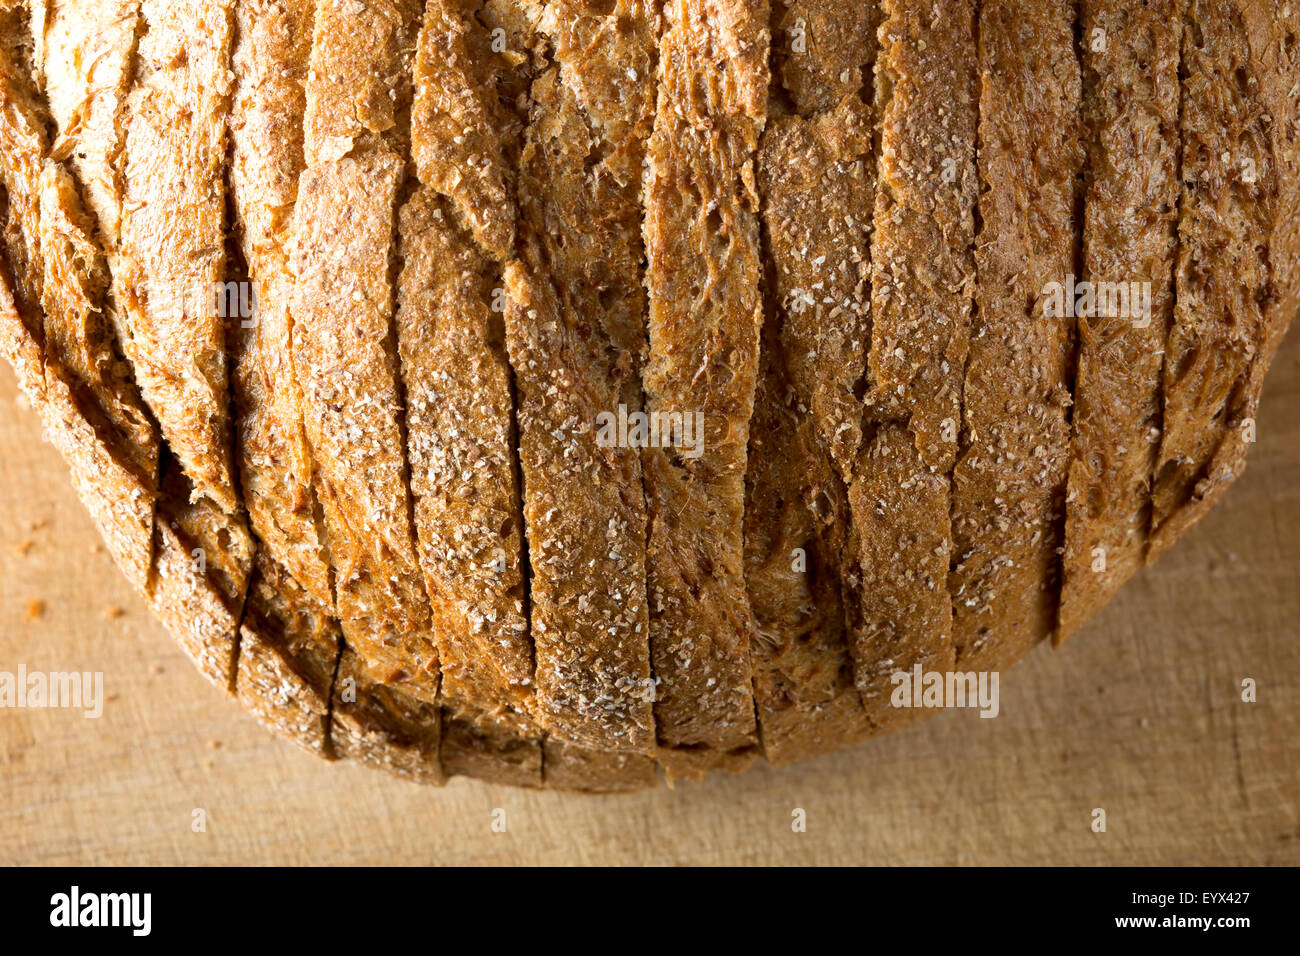 Bread loaf and slices on a cutting board Stock Photo